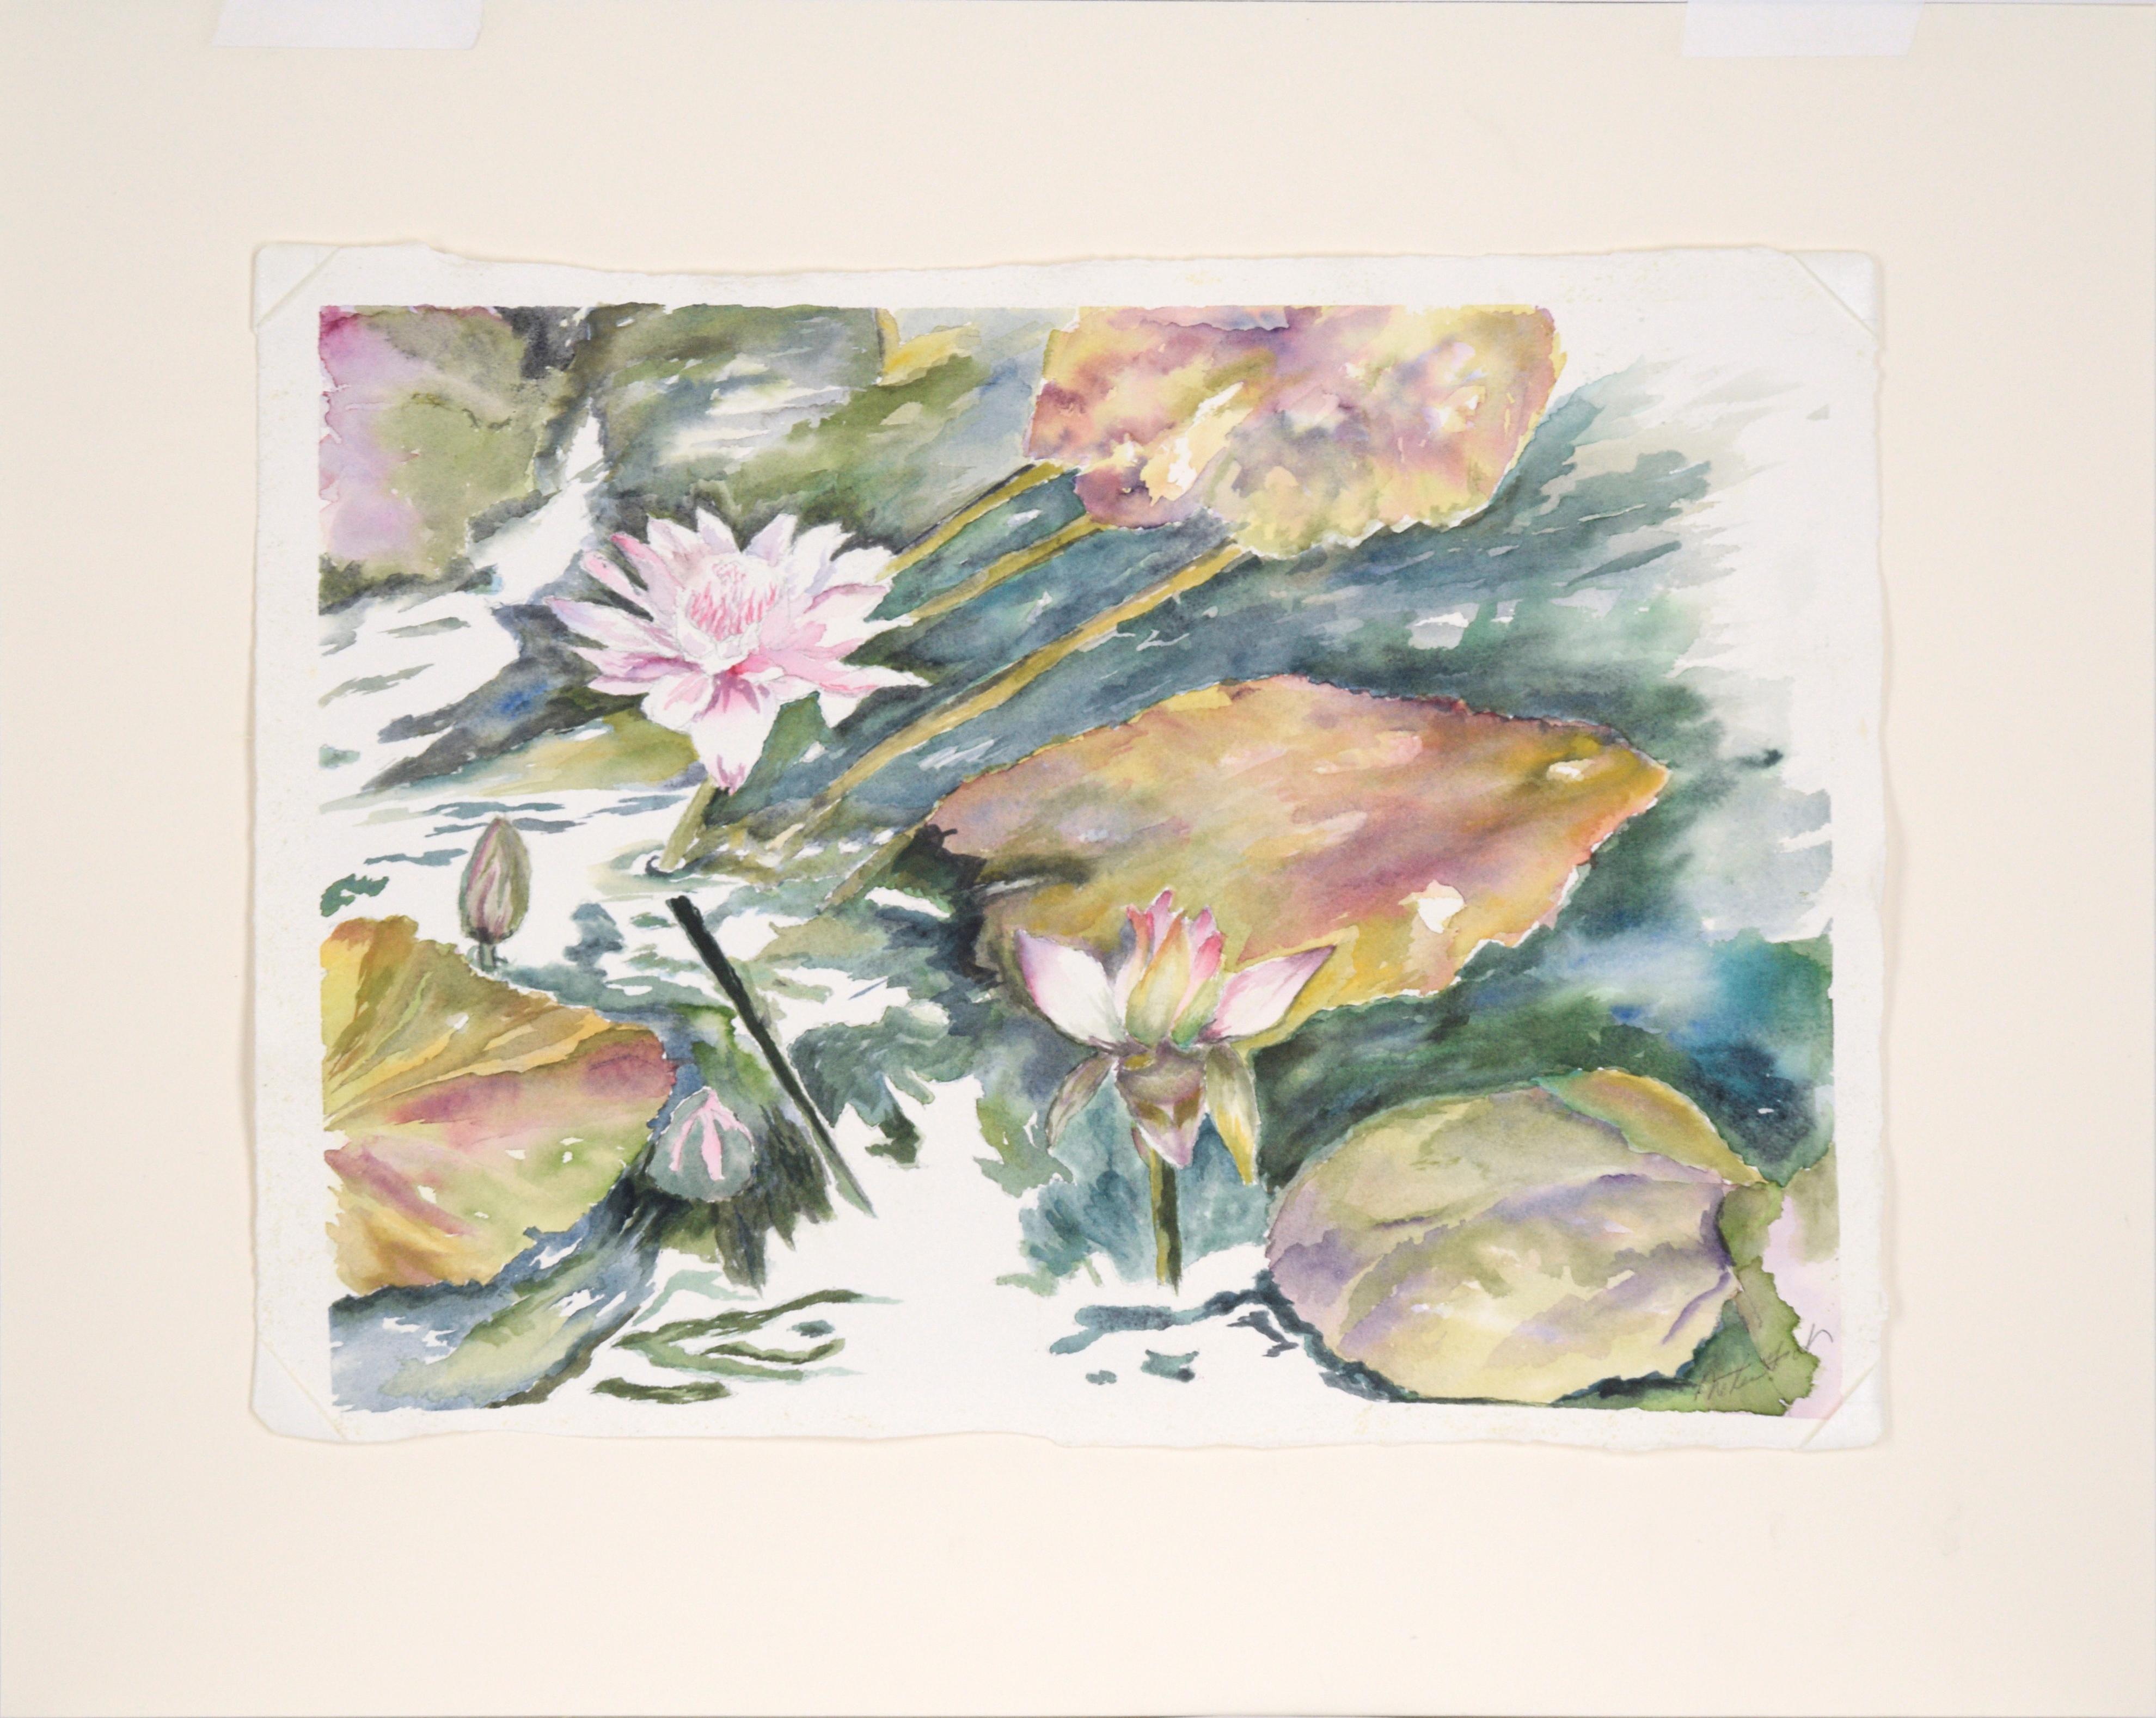 Delicate watercolor of lilies in a pond by an unknown artist (20th Century). Two flowers are blooming above lily pads in a pond. The flowers are rendered in a soft pink, whereas the lilies and water are dark greens and blues, creating a nice